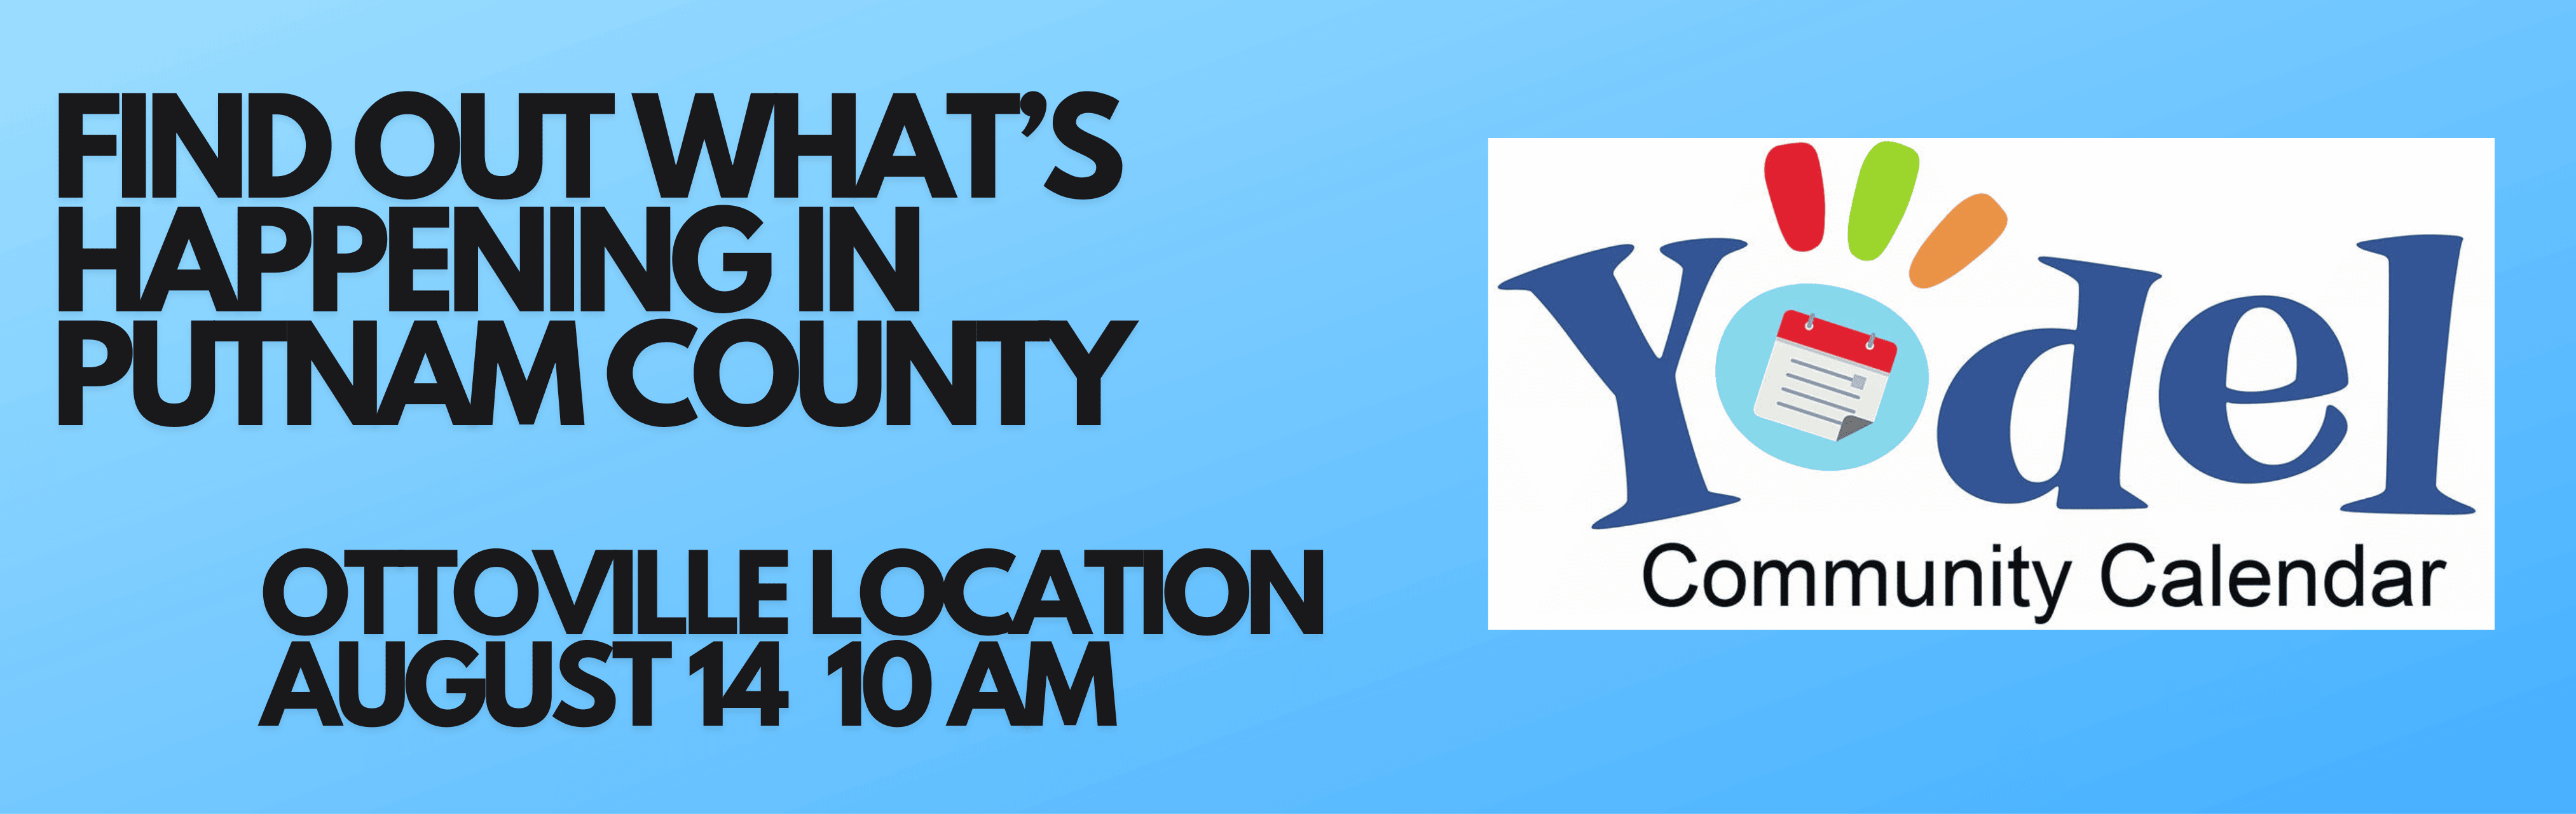 Find out what's happening in Putnam County Ottoville location August 14 10 am Yodel Logo